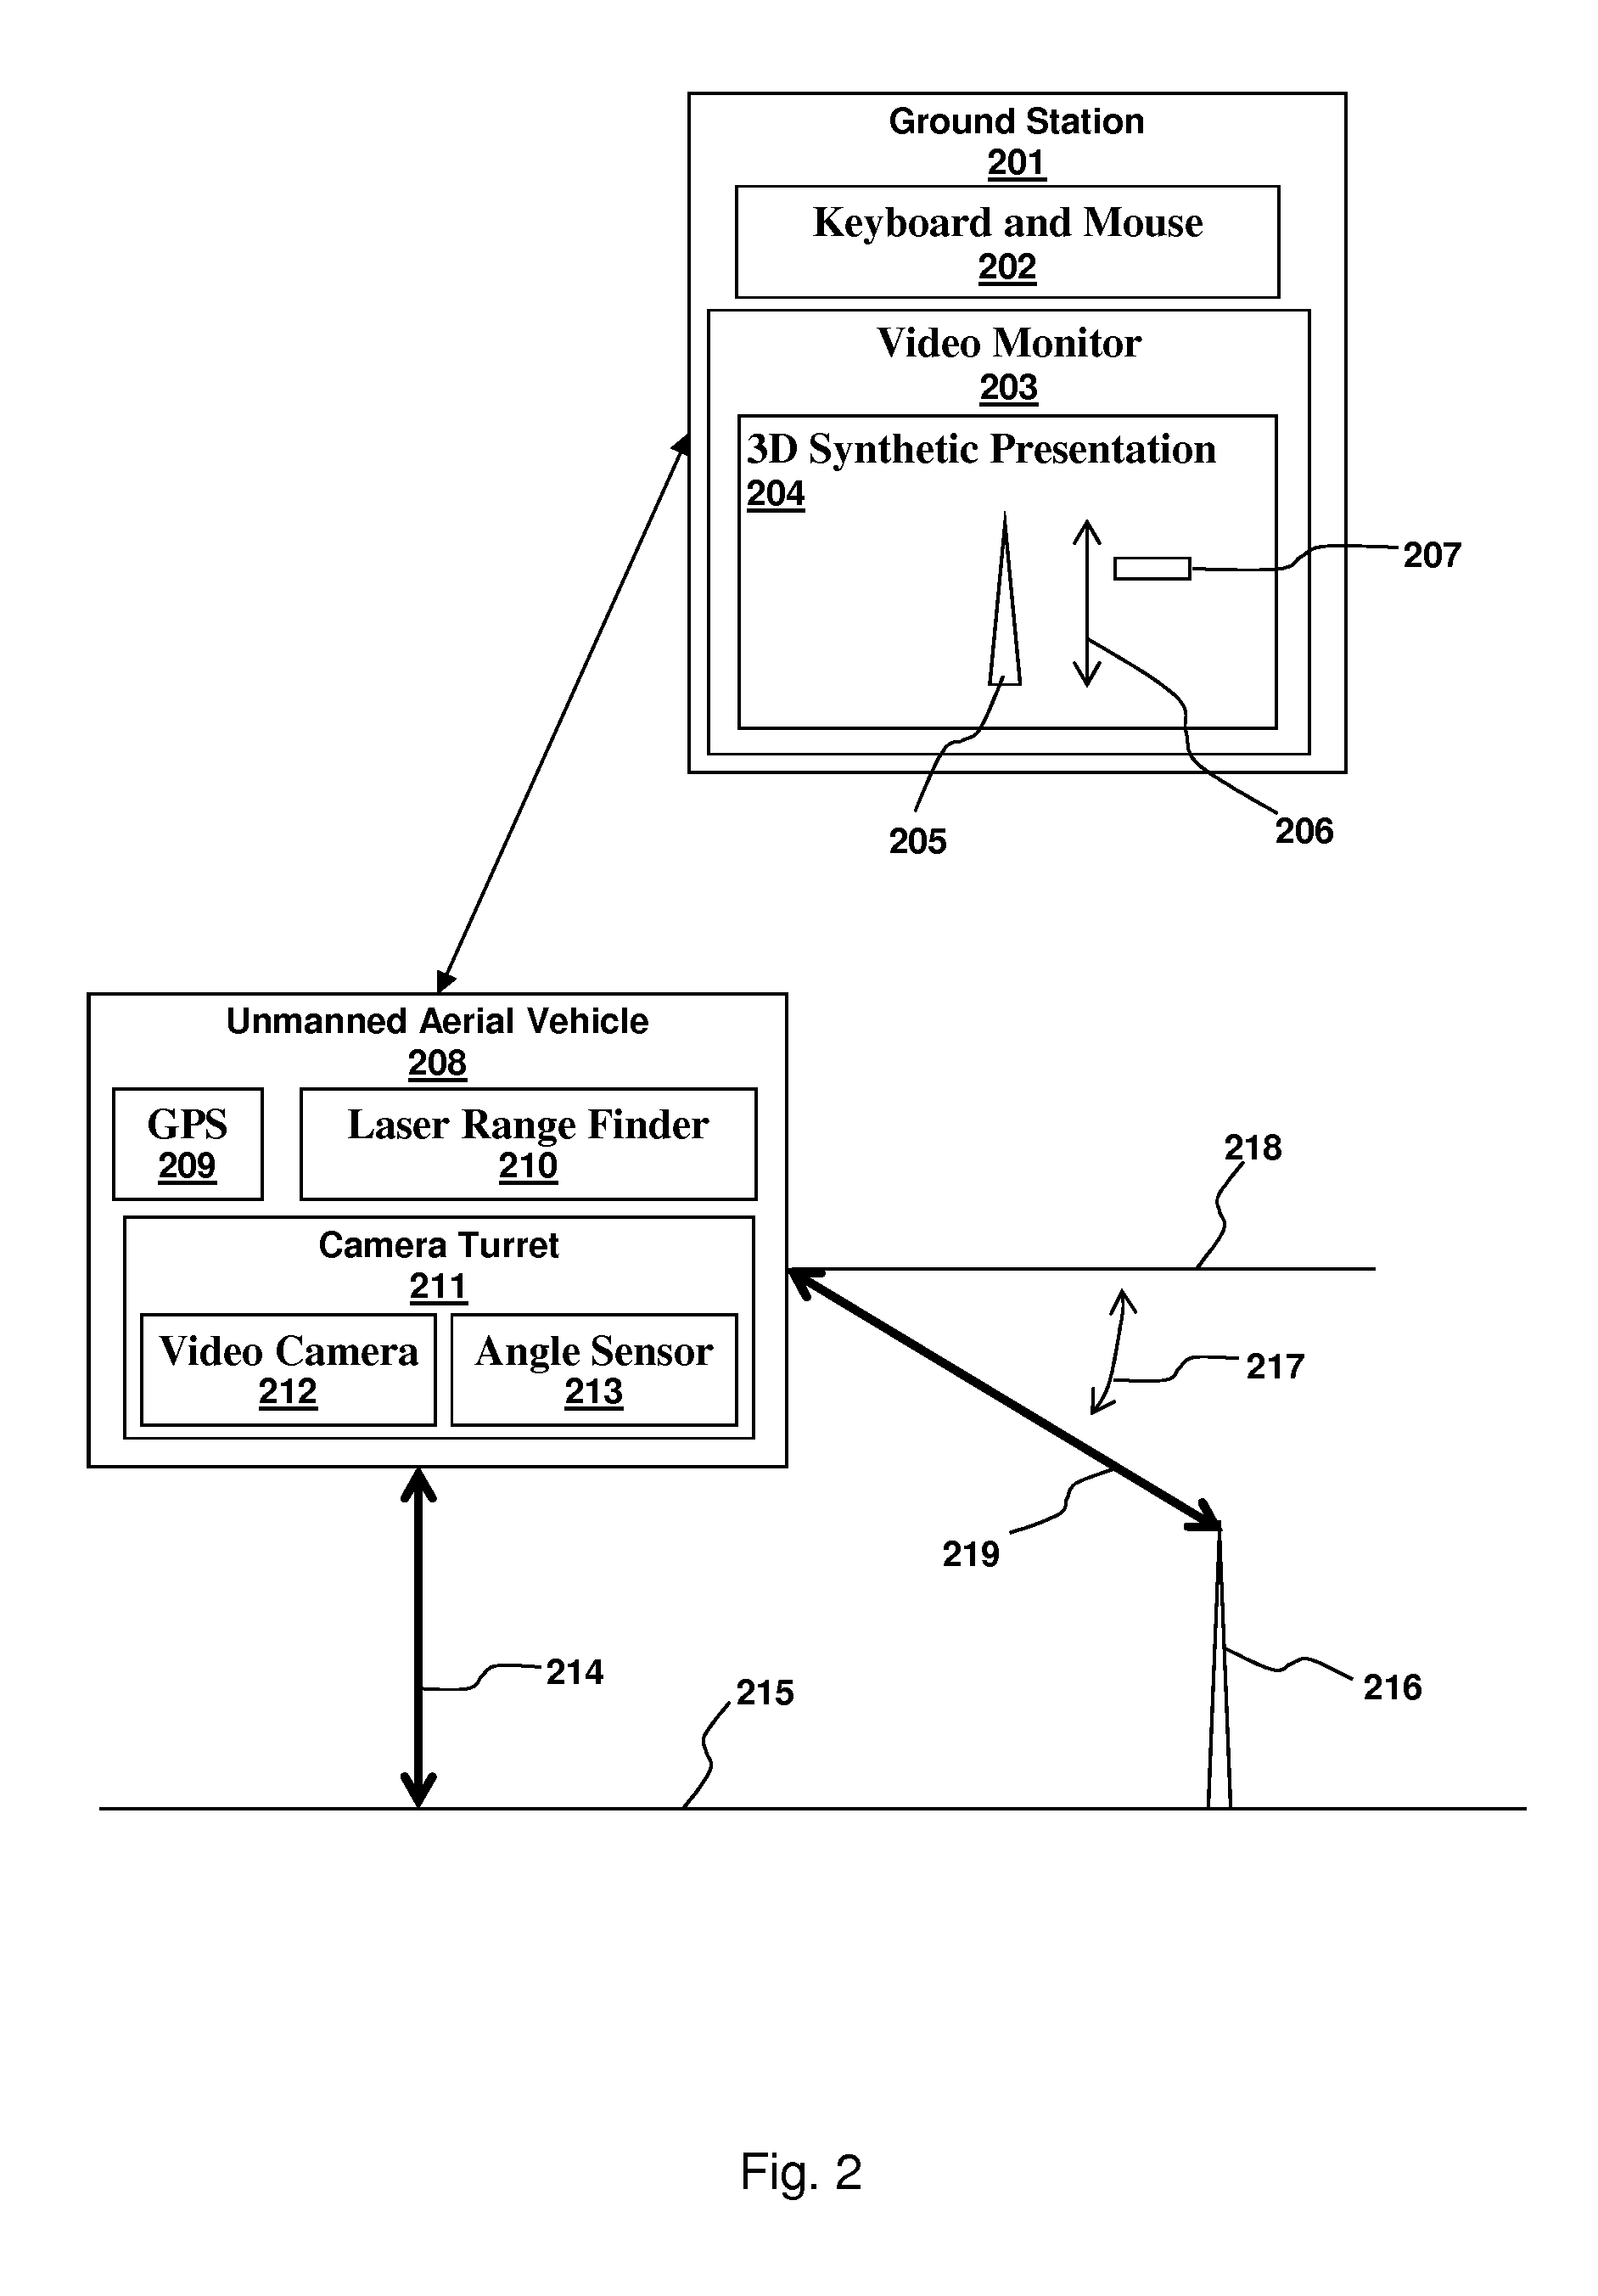 Apparatus for measurement of vertical obstructions